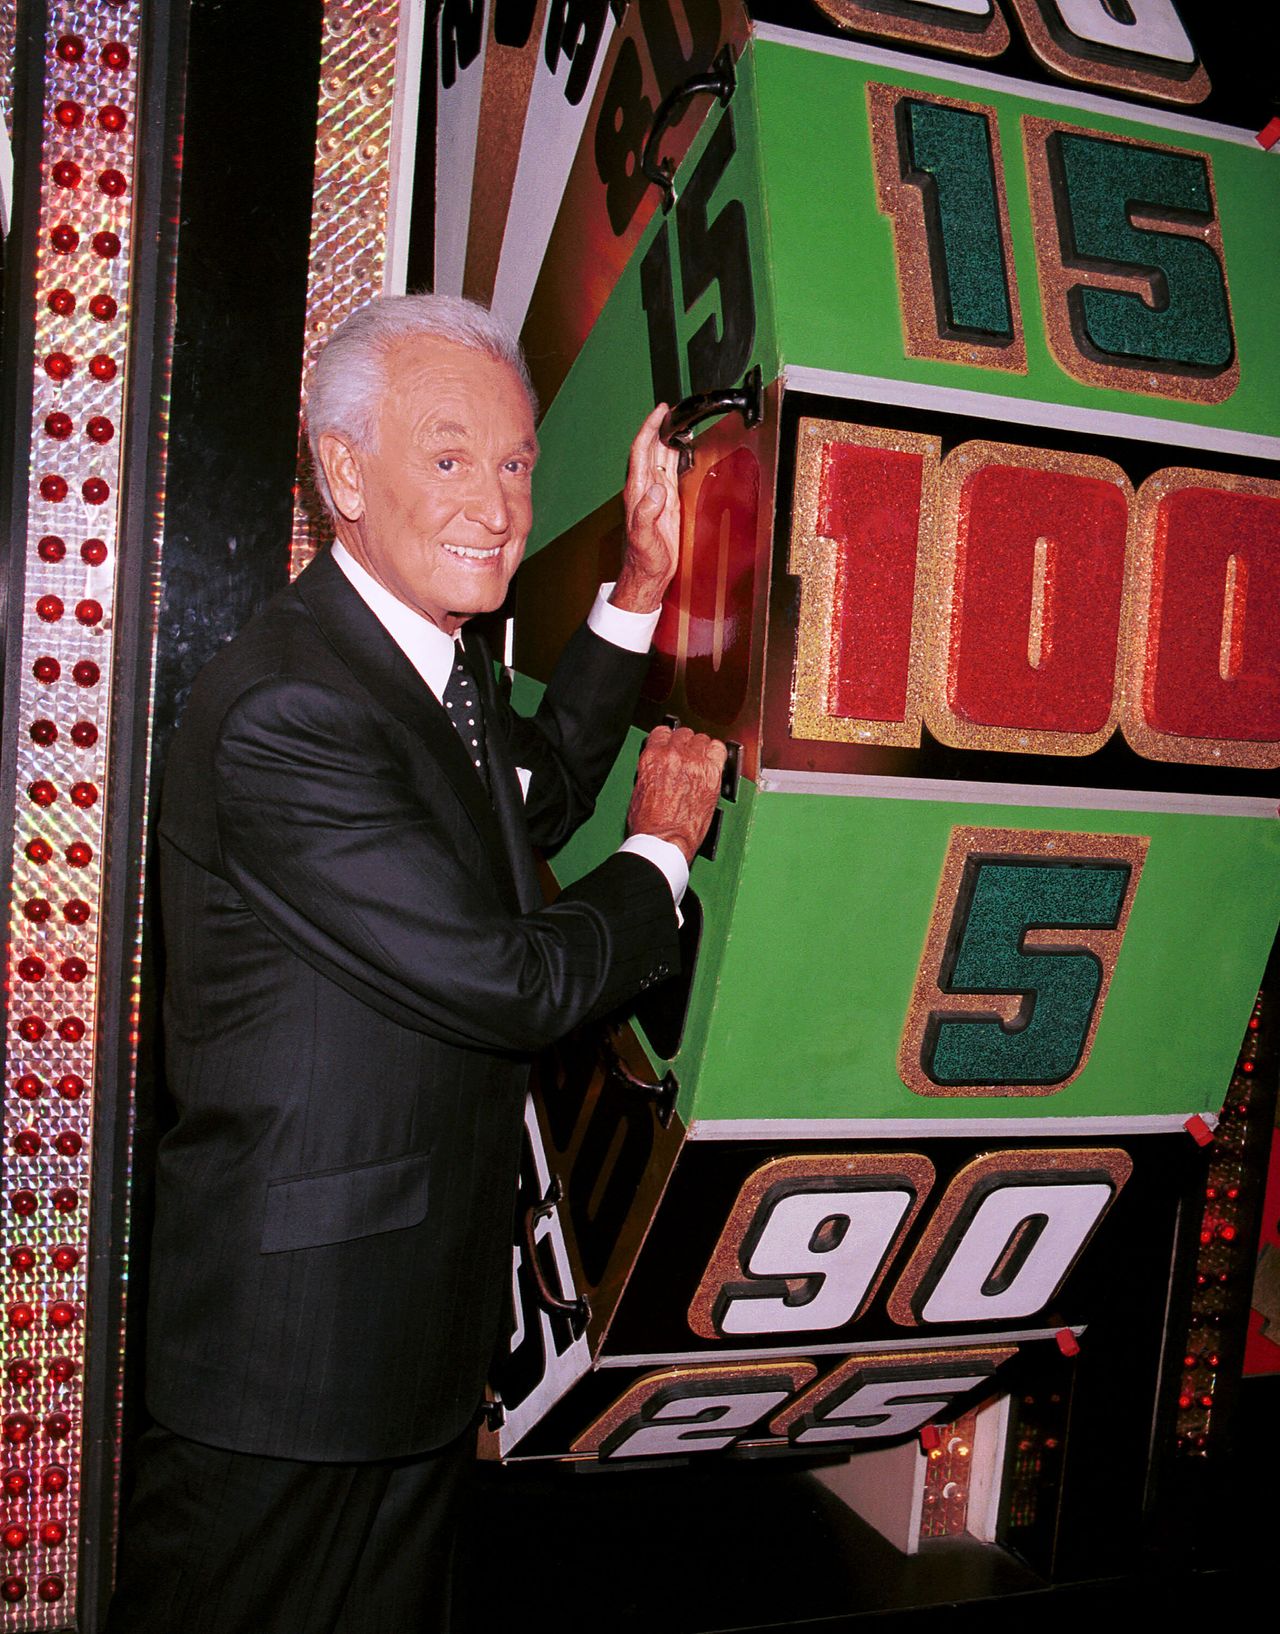 Barker poses by a game prop to celebrate his 30th anniversary as host of "The Price Is Right" in Los Angeles on June 6, 2001.